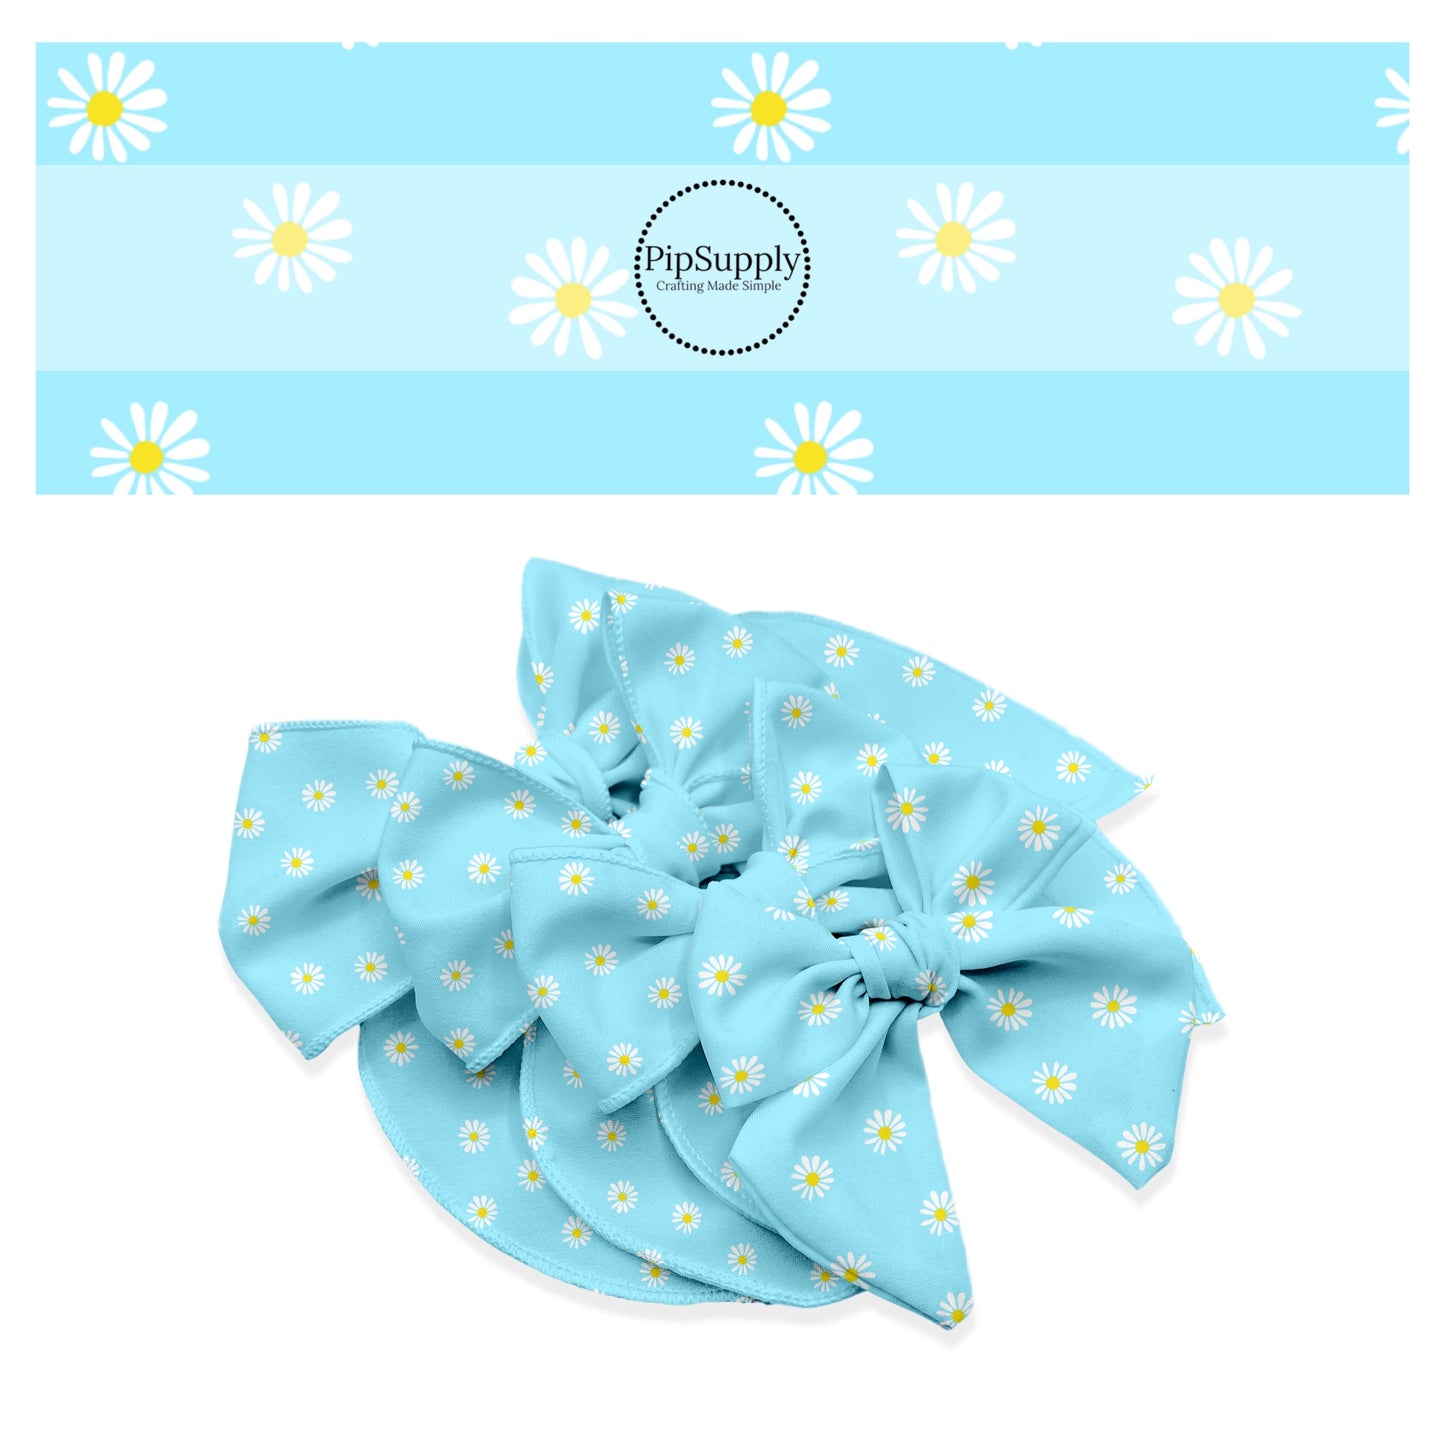 Sky Blue No Sew Bow Strips - Bow Making Material - Blue Bows with White Daises Throughout. Spring Bows - Easter Bows